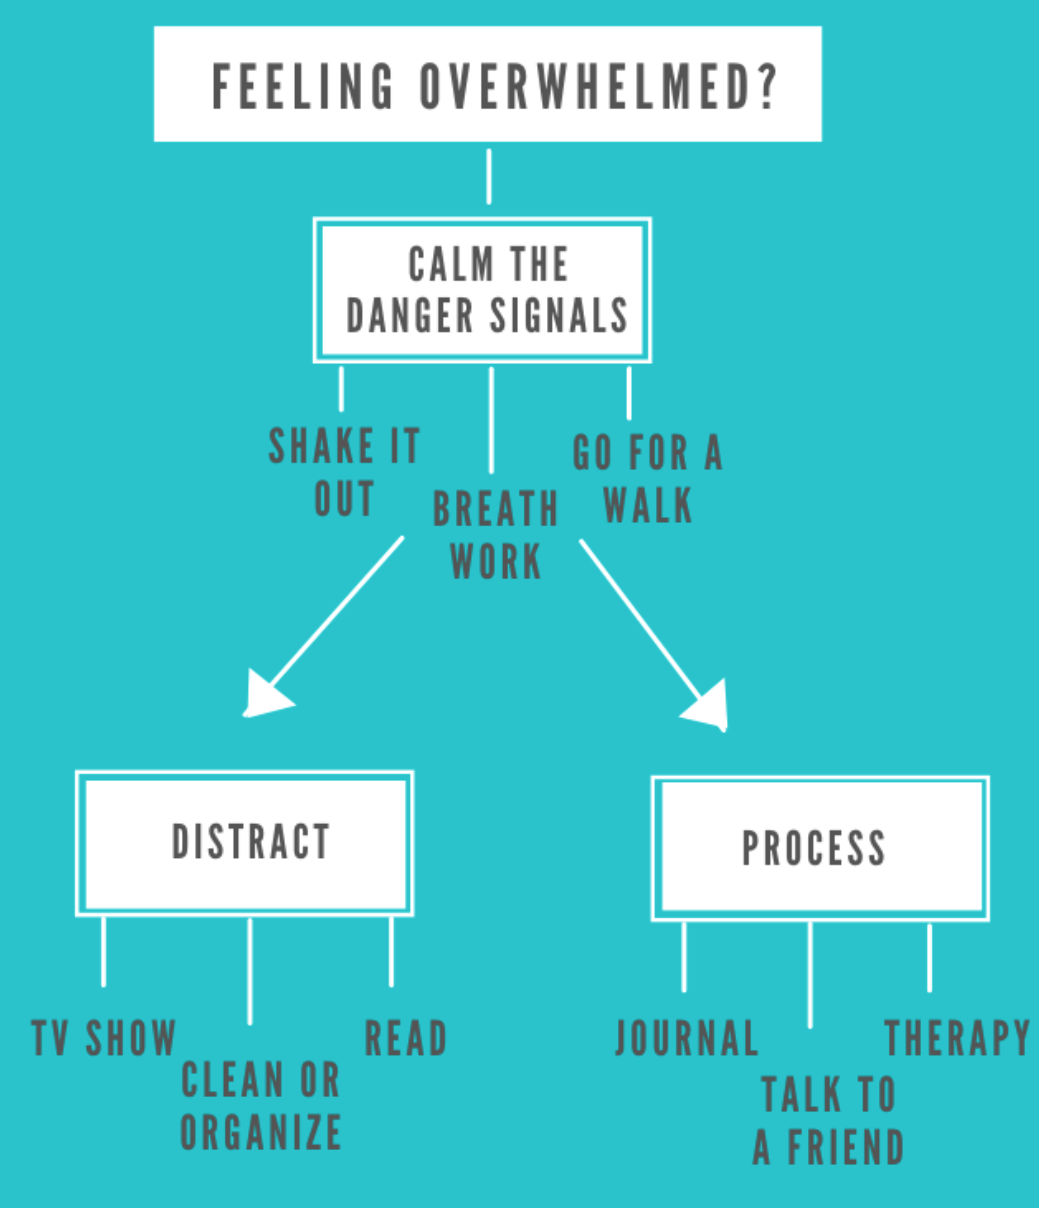 What to do if you're feeling overwhelmed